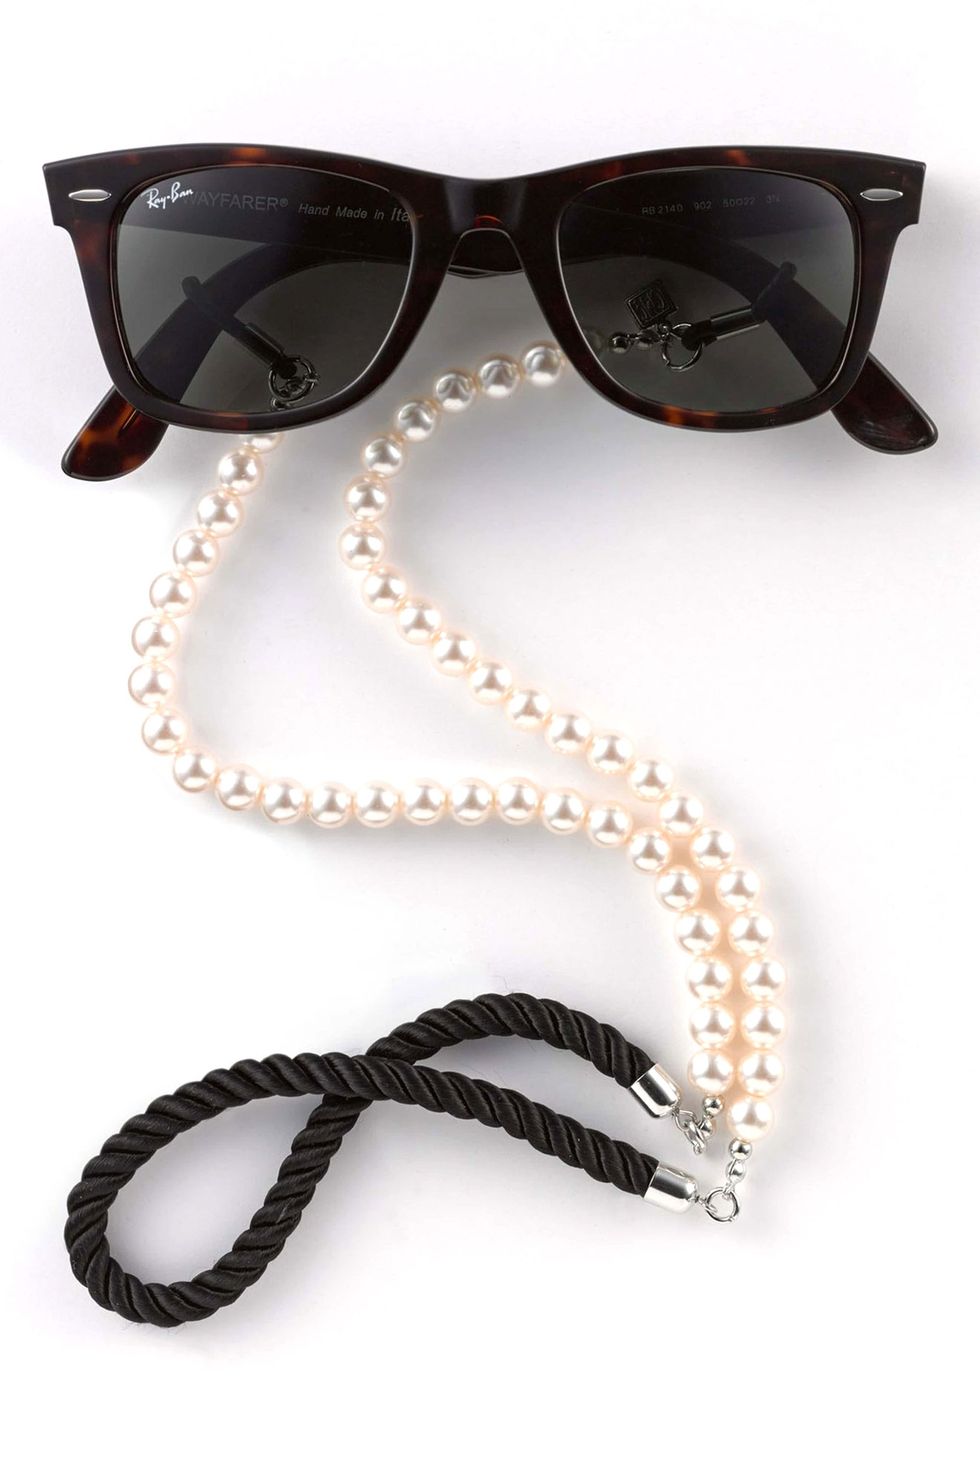 Affordable & Chic Sunglass Chain: Don't Miss Our Mineral Link